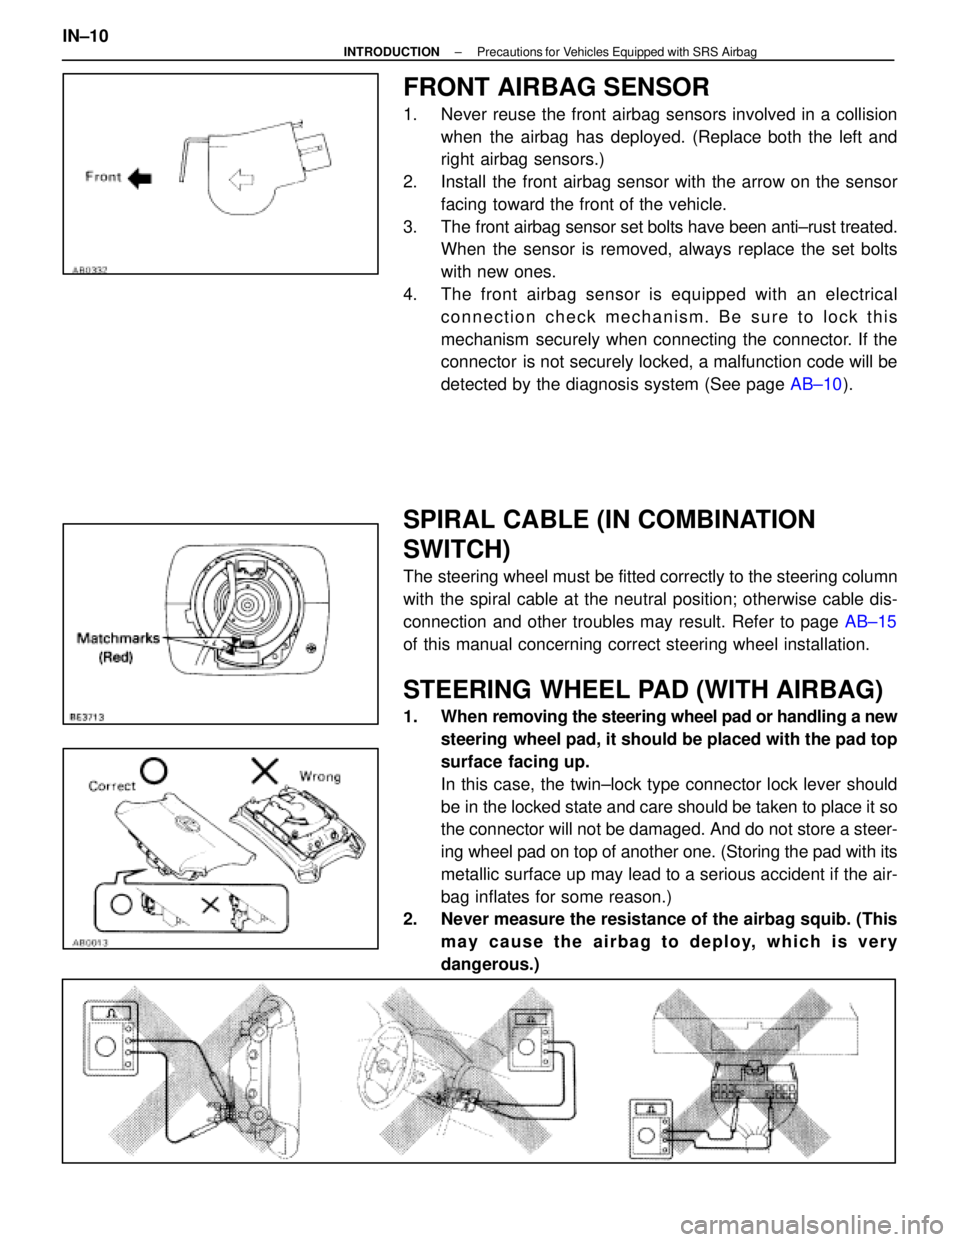 LEXUS SC300 1991  Service Repair Manual 
FRONT AIRBAG SENSOR
1.  Never reuse the front airbag sensors involved in a collisionwhen the airbag has deployed. (Replace both the left and
right airbag sensors.)
2.  Install the front airbag sensor